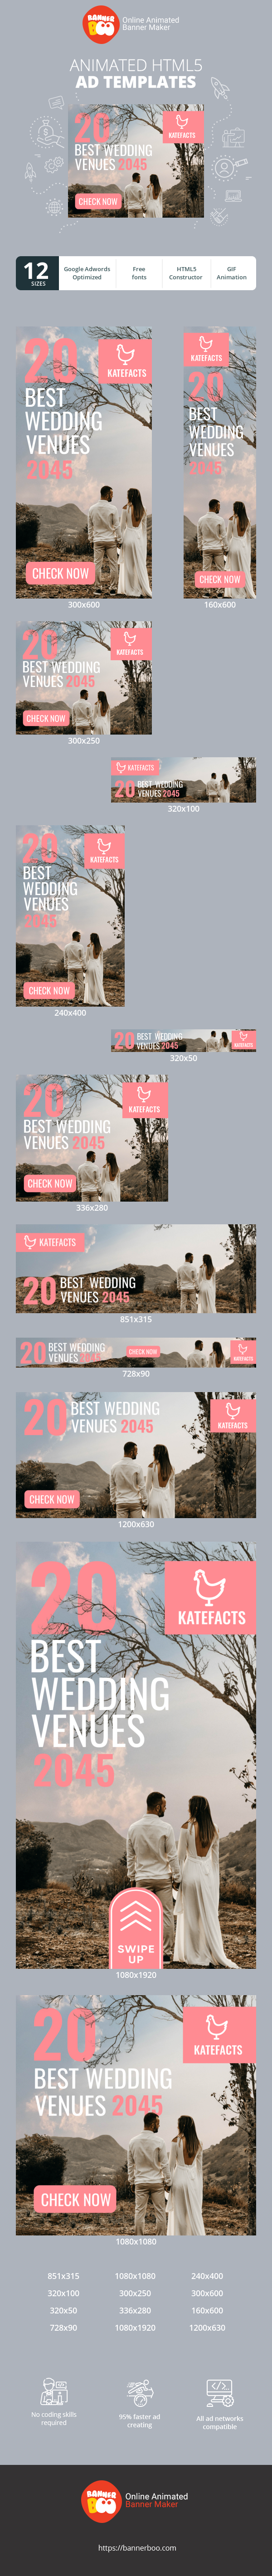 Banner ad template — 20 Best Wedding Venues 2045 — Lifestyle Blog